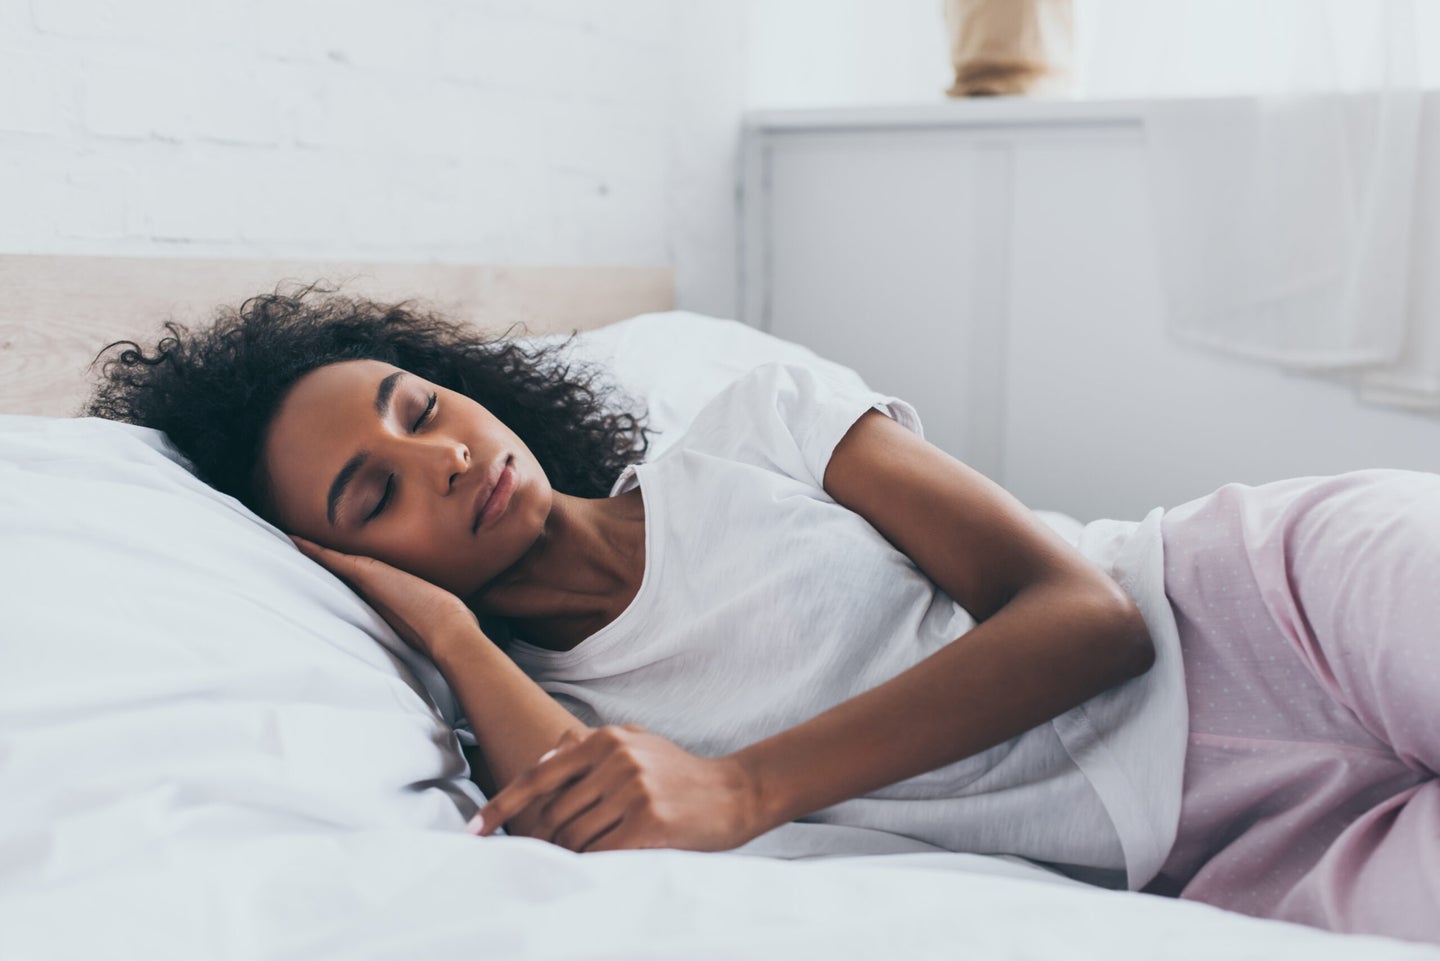 The only detox you need is sleep—but it’s not totally clear why